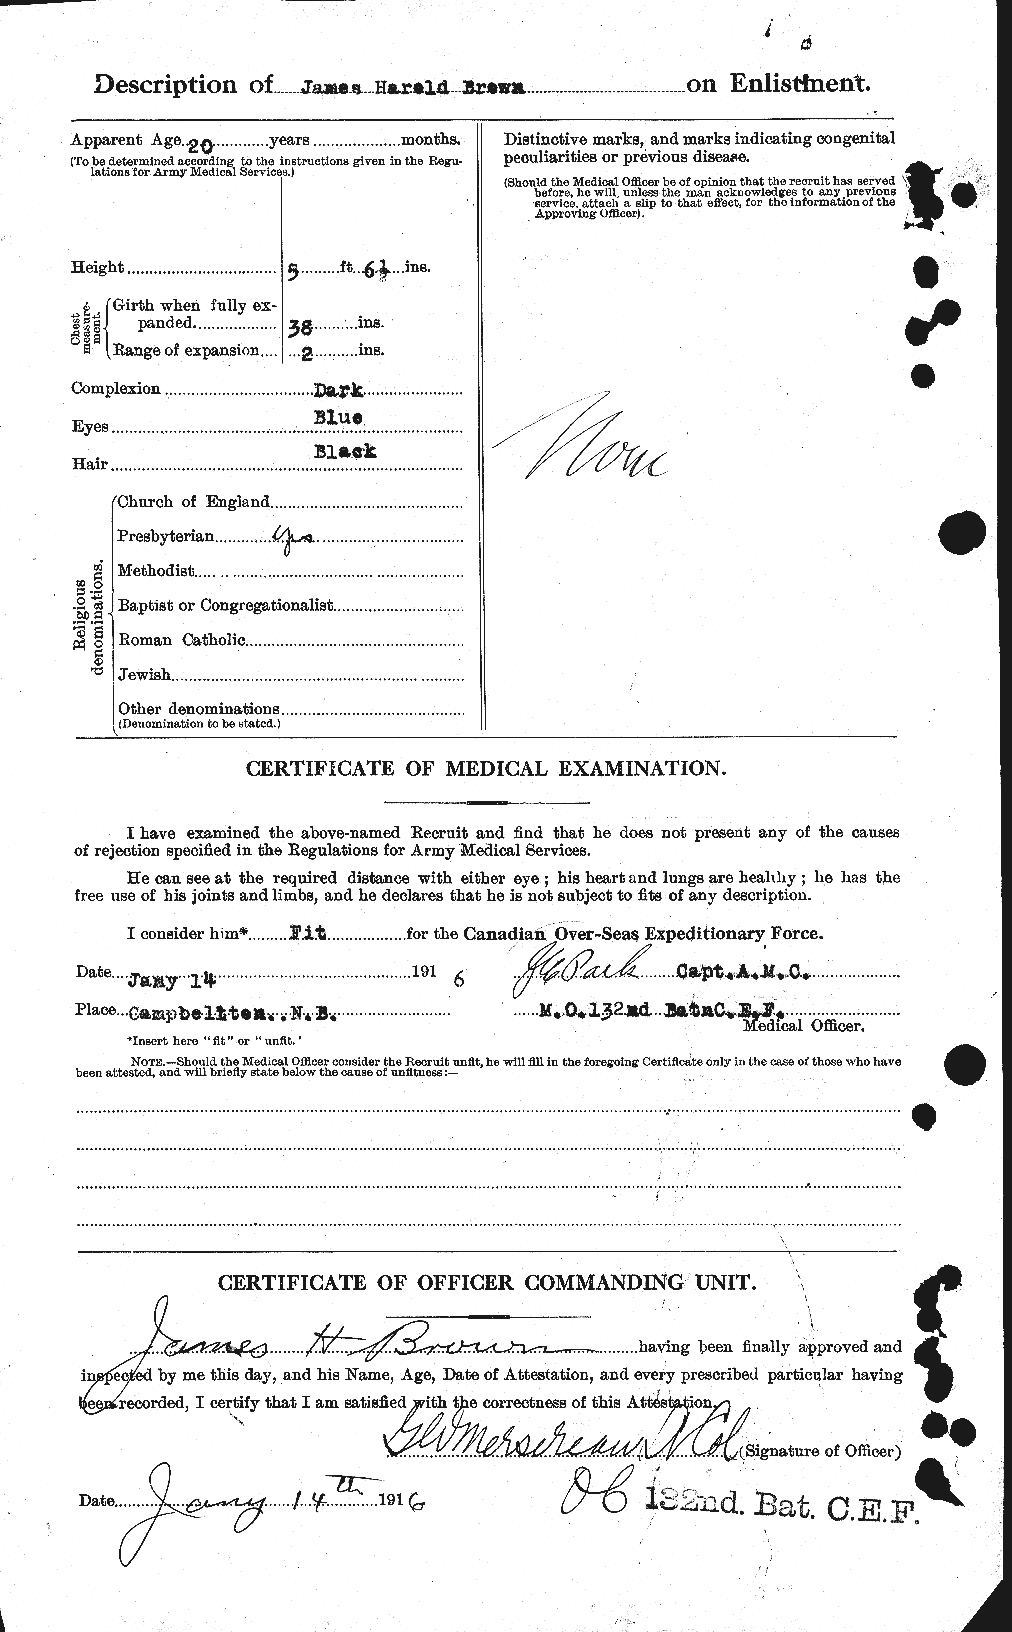 Personnel Records of the First World War - CEF 269541b